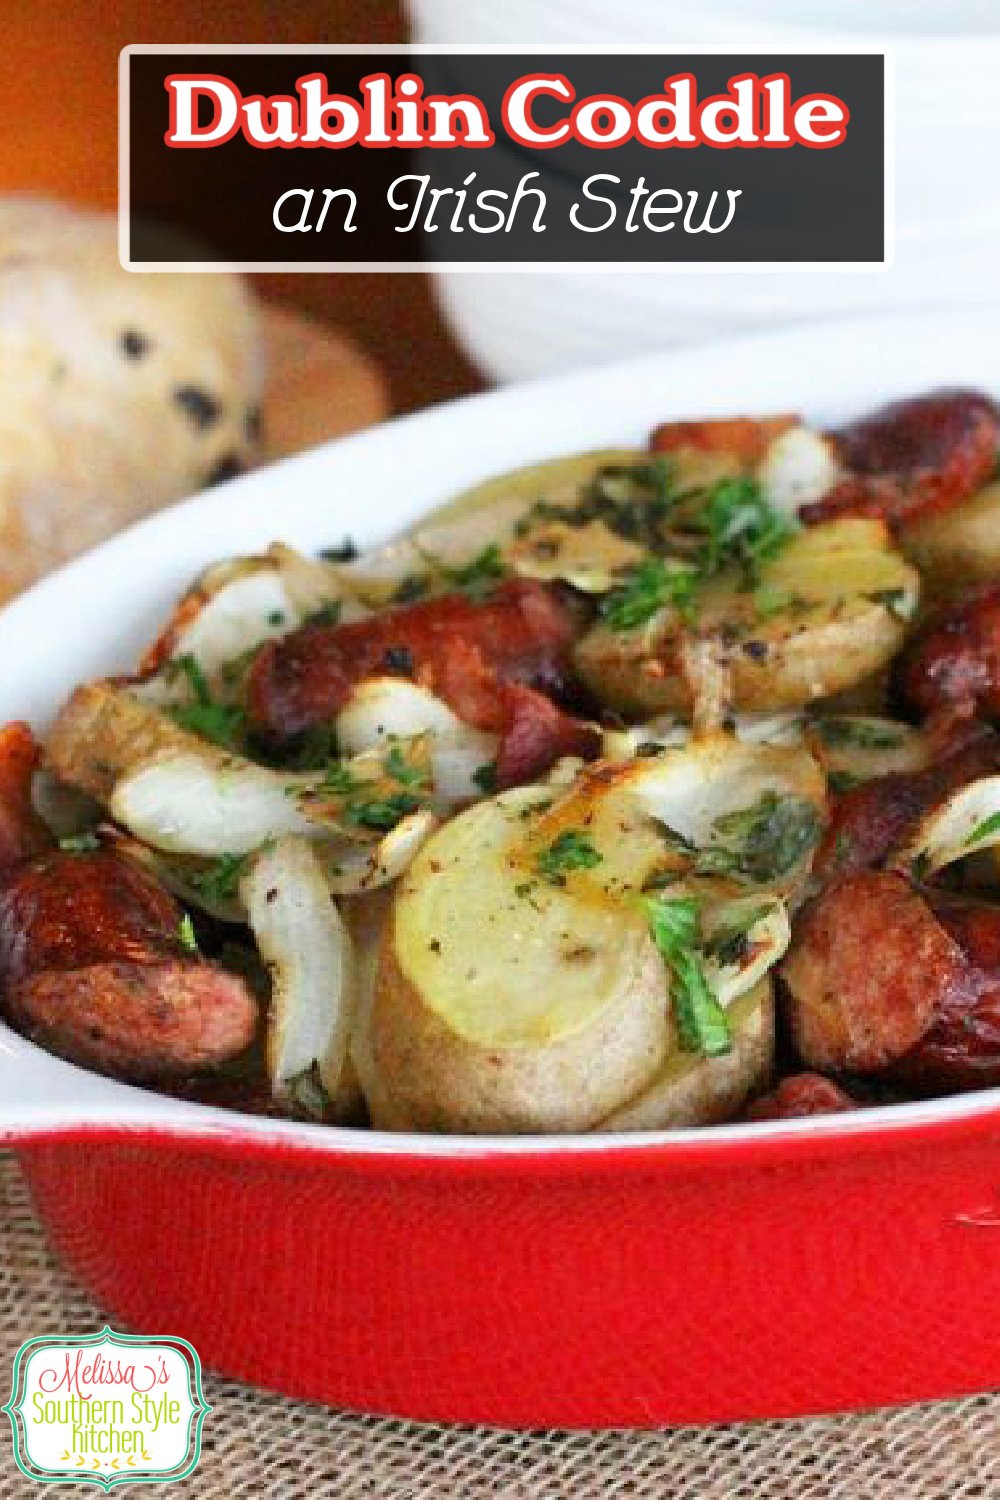 This Dublin Coddle recipe is packed with simple flavors that result in a rich and hearty meal. #stpatricksday #porkrecipes #porkstew #irishrecipes #dublincoddle #smokedsausages #stew #stewrecipes via @melissasssk